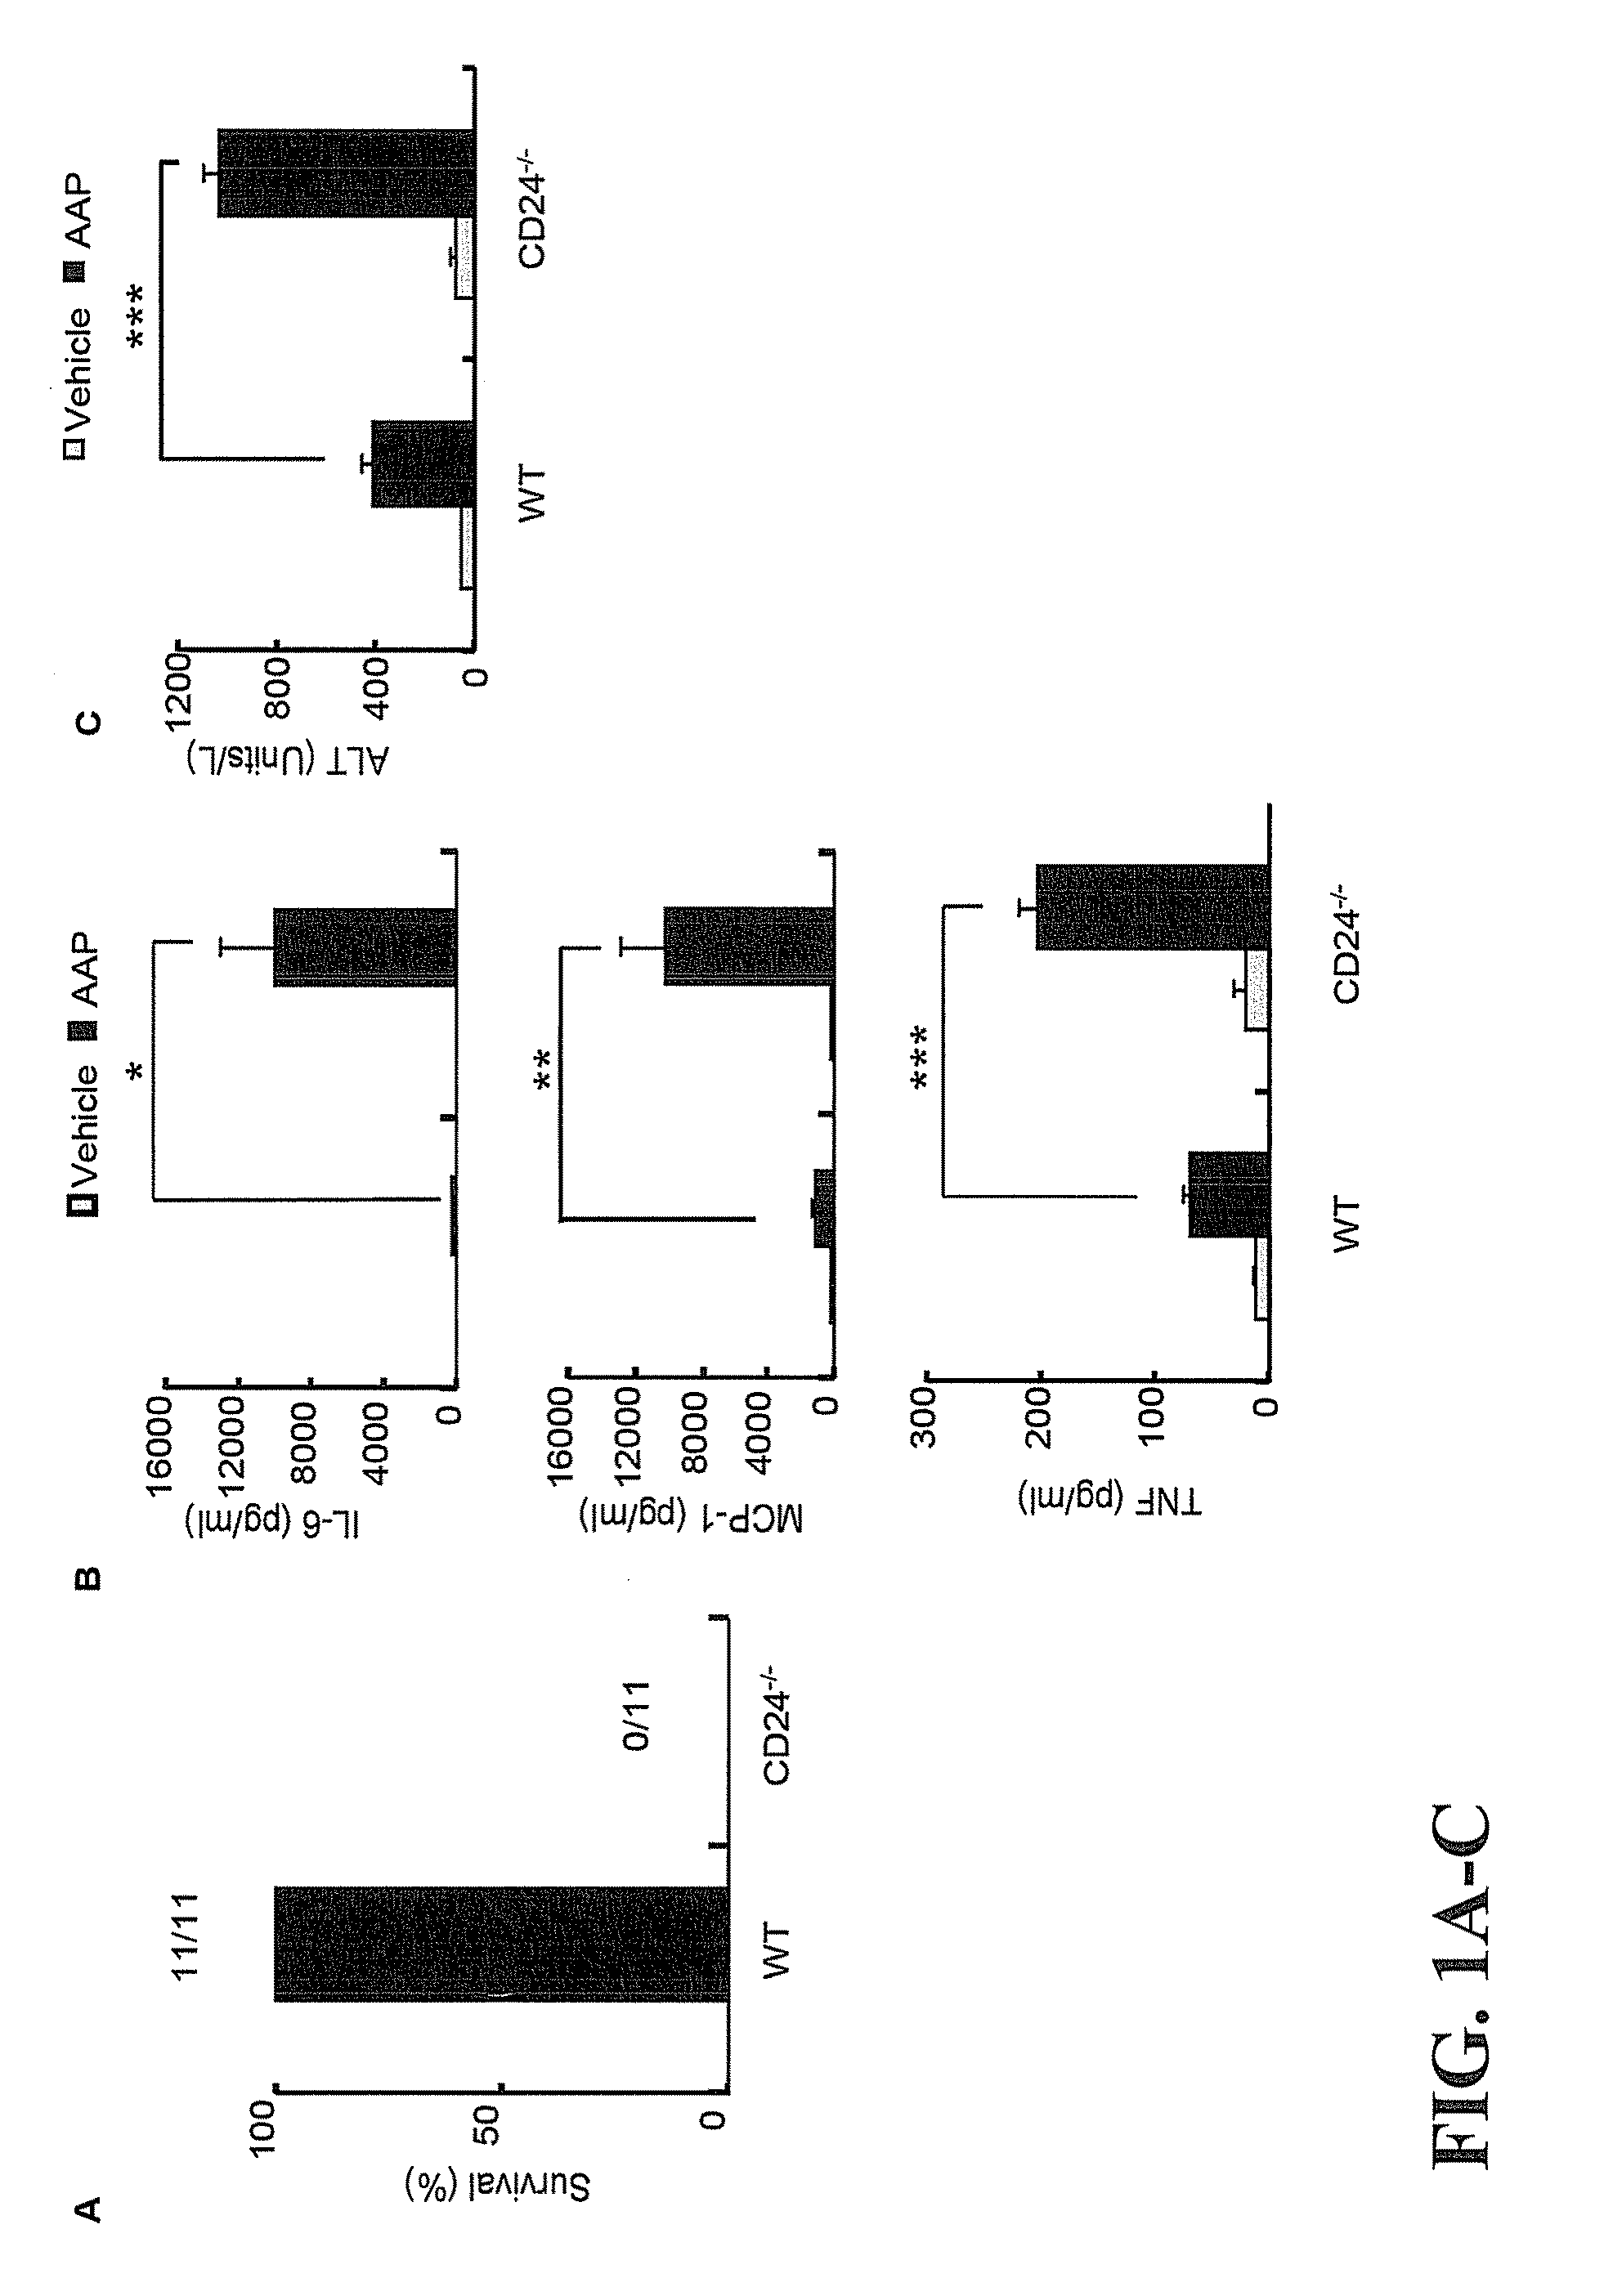 Treatment of drug-related side effect and tissue damage by targeting the cd24-hmgb1-siglec10 axis